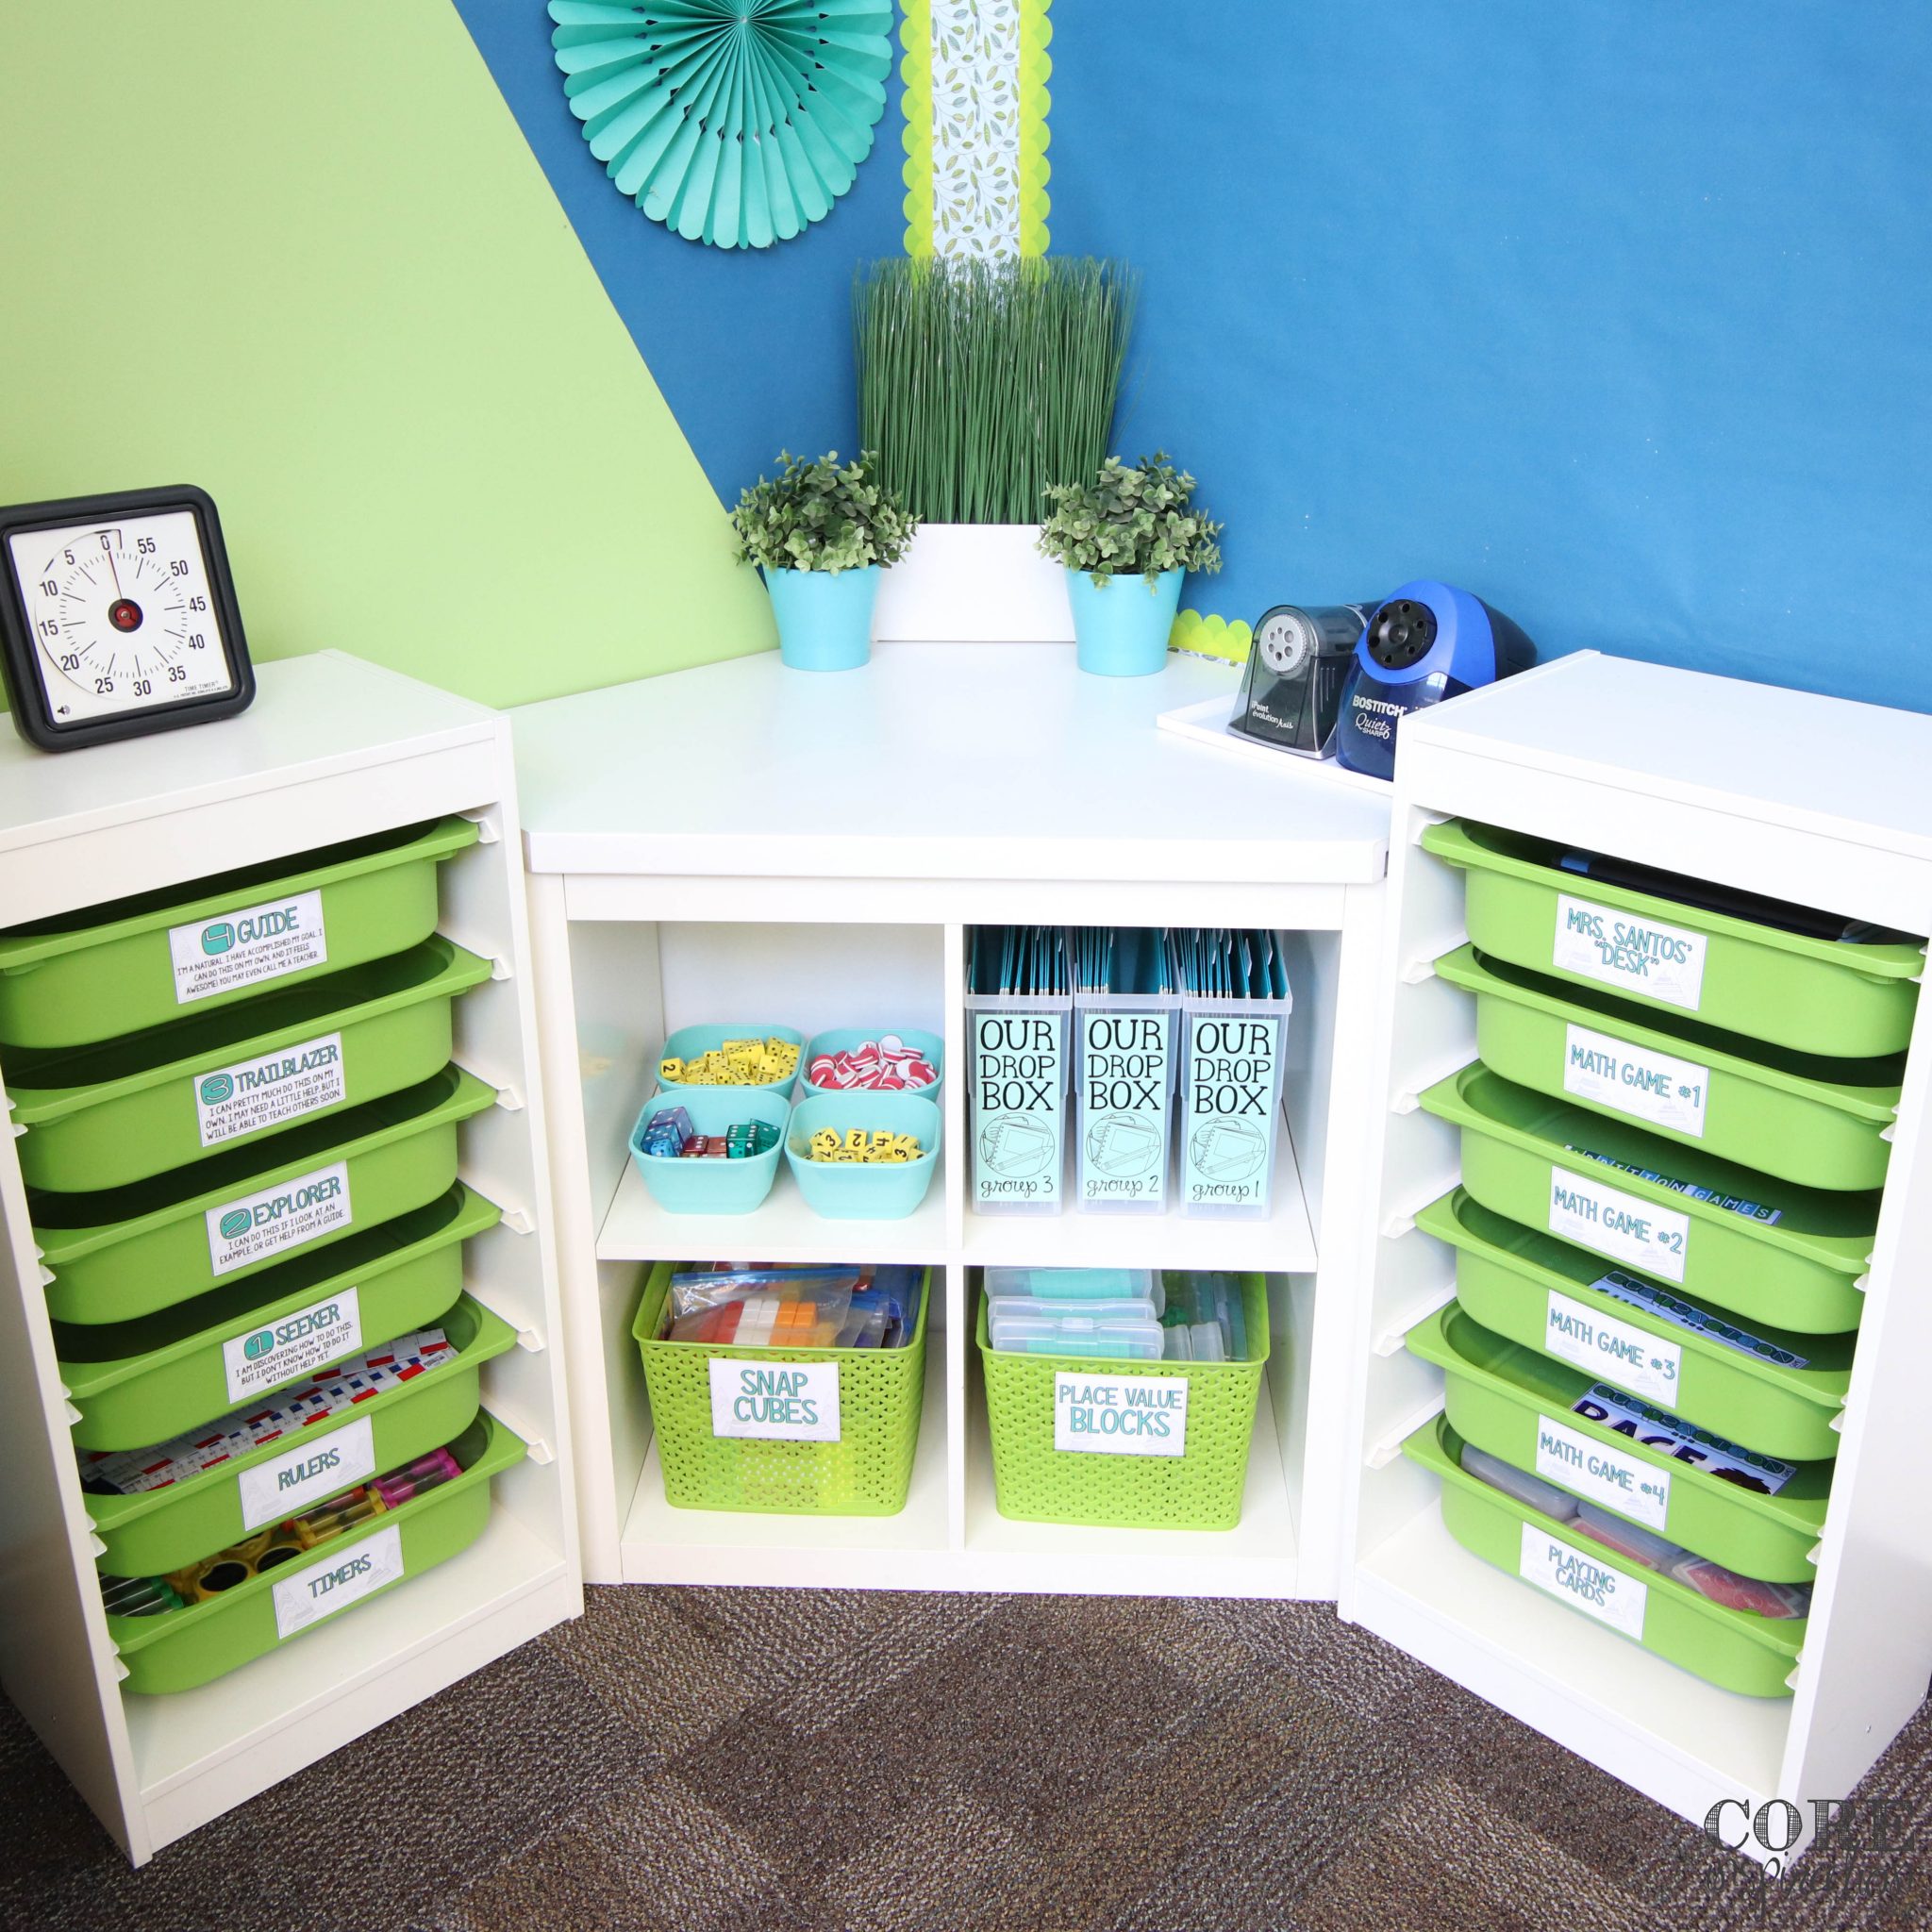 Shelf in the corner of the classroom where all the math workshop manipulatives and supplies are organized and easily accessible to students so they can work more independently during math rotations.